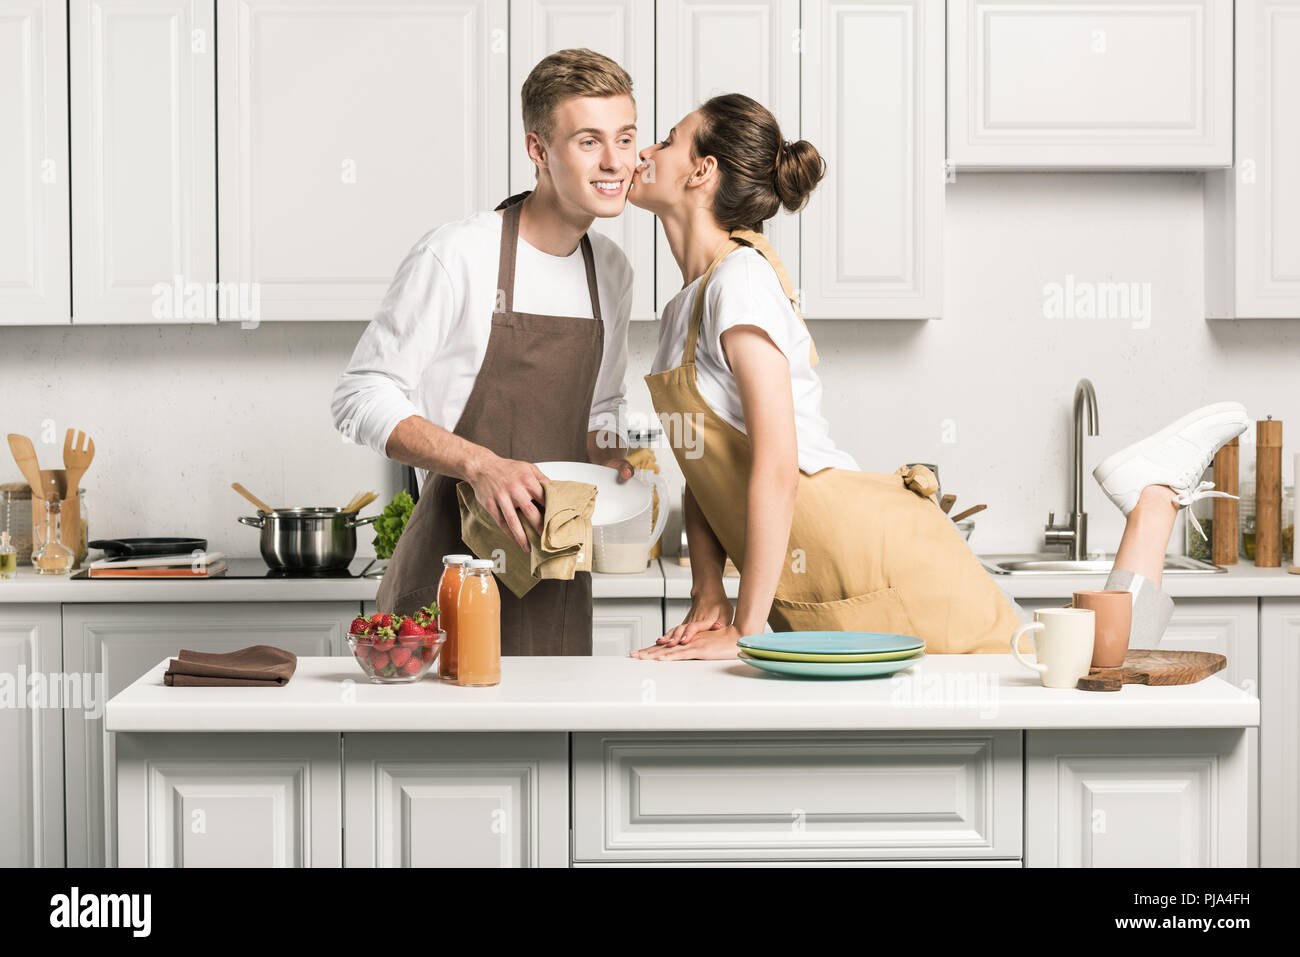 https://c8.alamy.com/comp/PJA4FH/girlfriend-kissing-boyfriend-for-drying-dishes-in-kitchen-PJA4FH.jpg